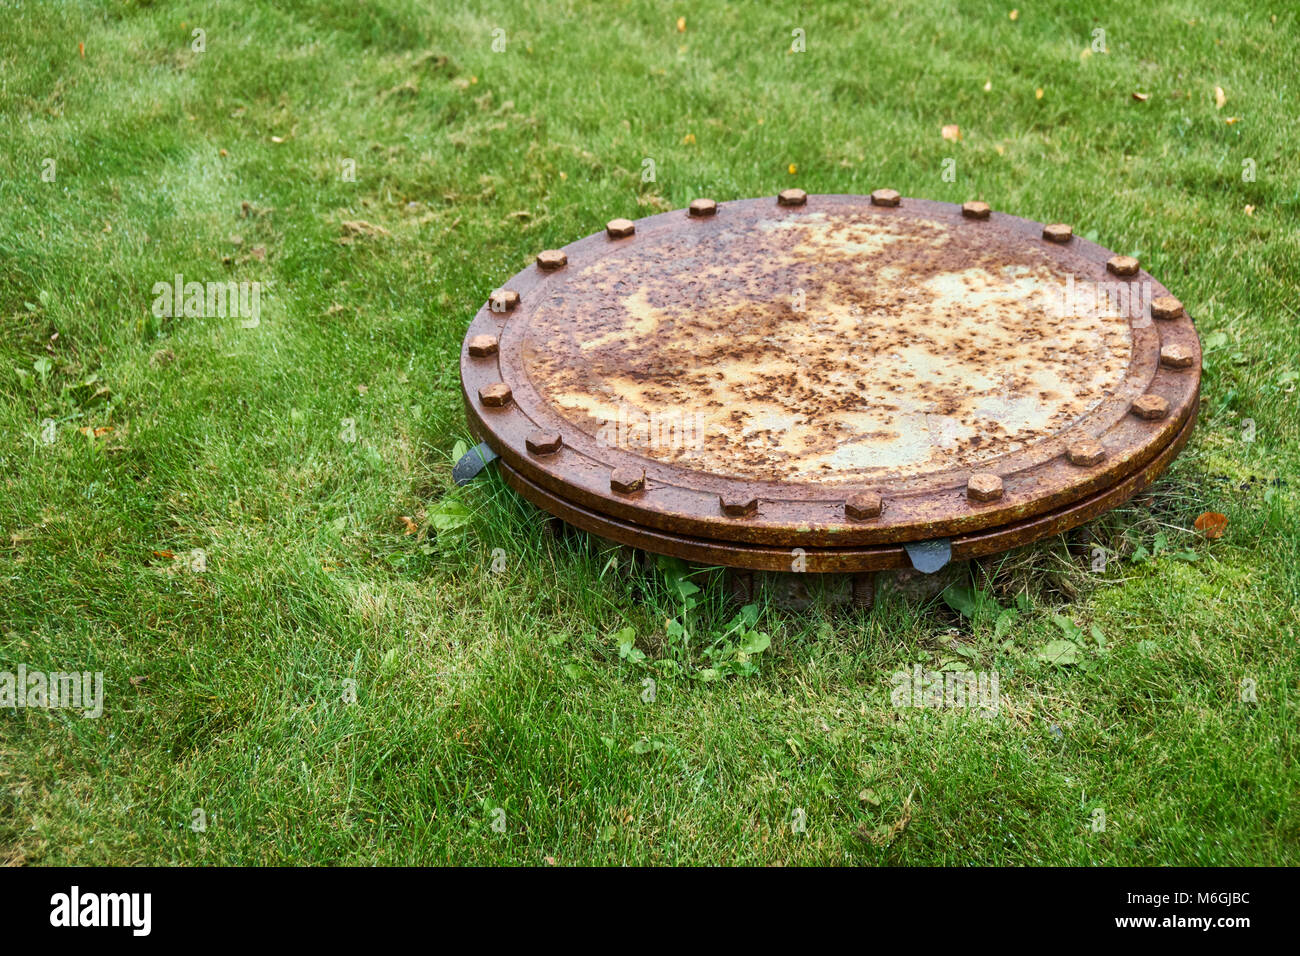 Outdated round manhole rusty metal cover on rain drainage system located on lawn with green lush grass closeup Stock Photo